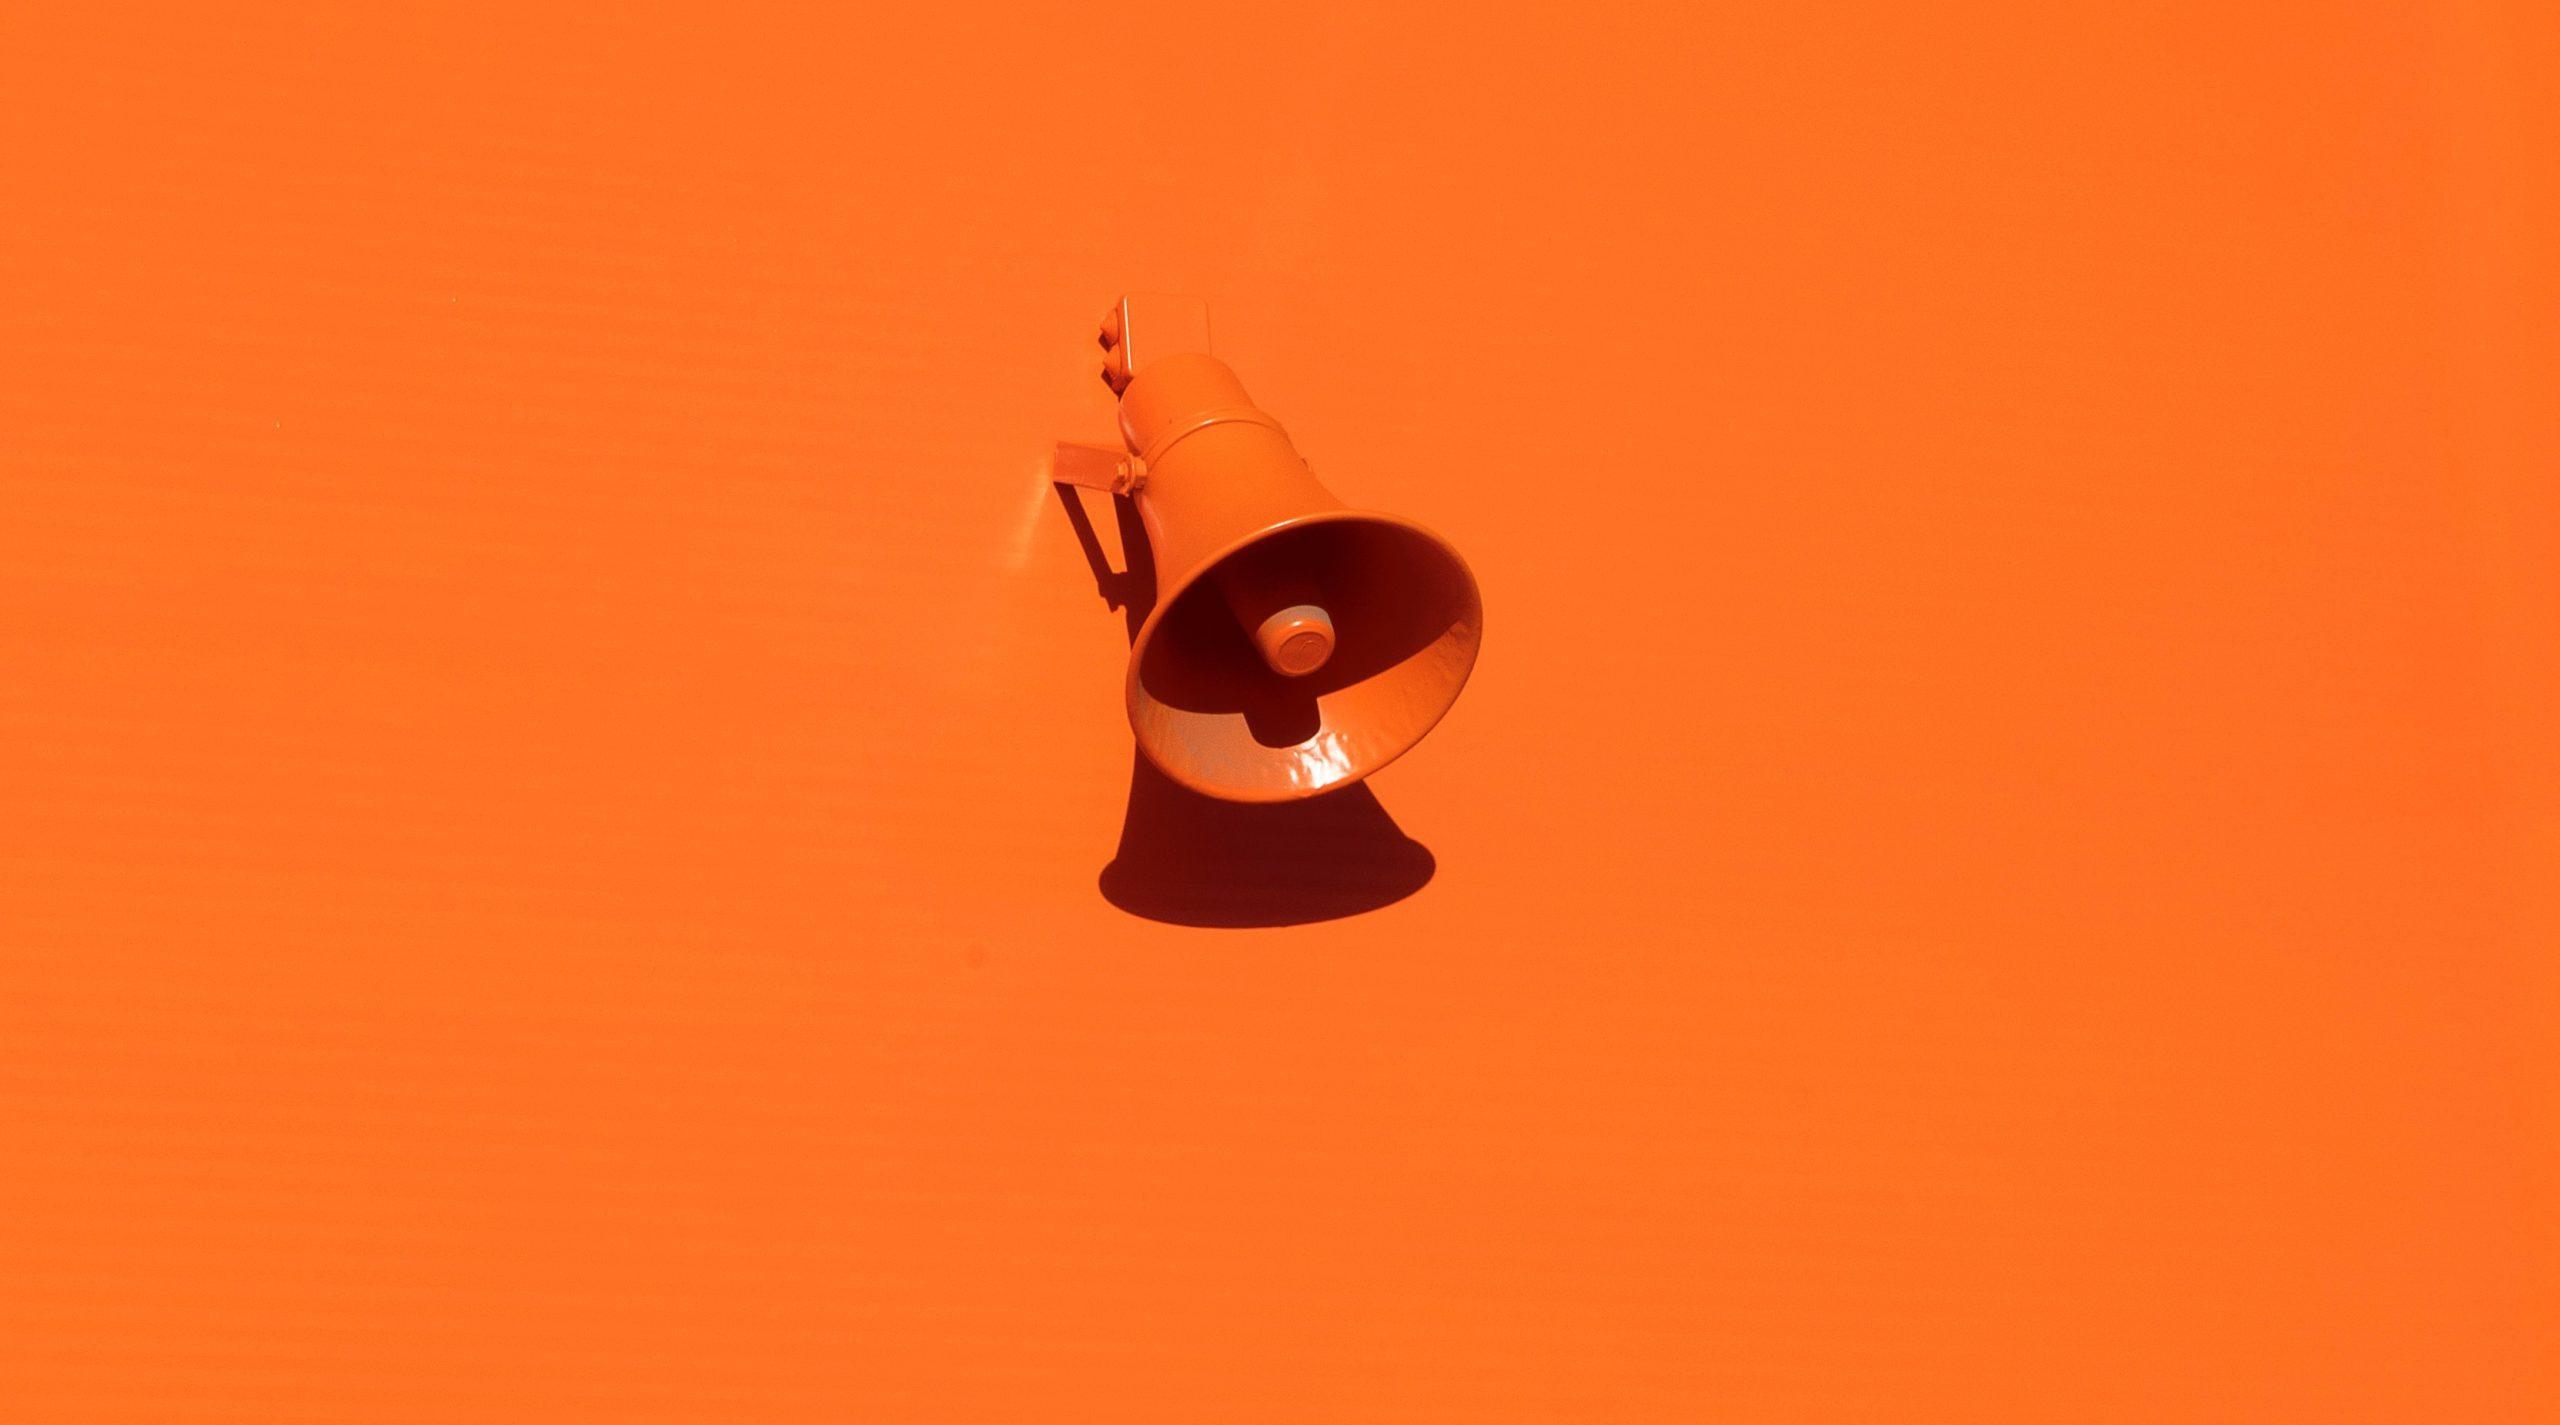 Orange megaphone against an orange background as part of an article about company values.